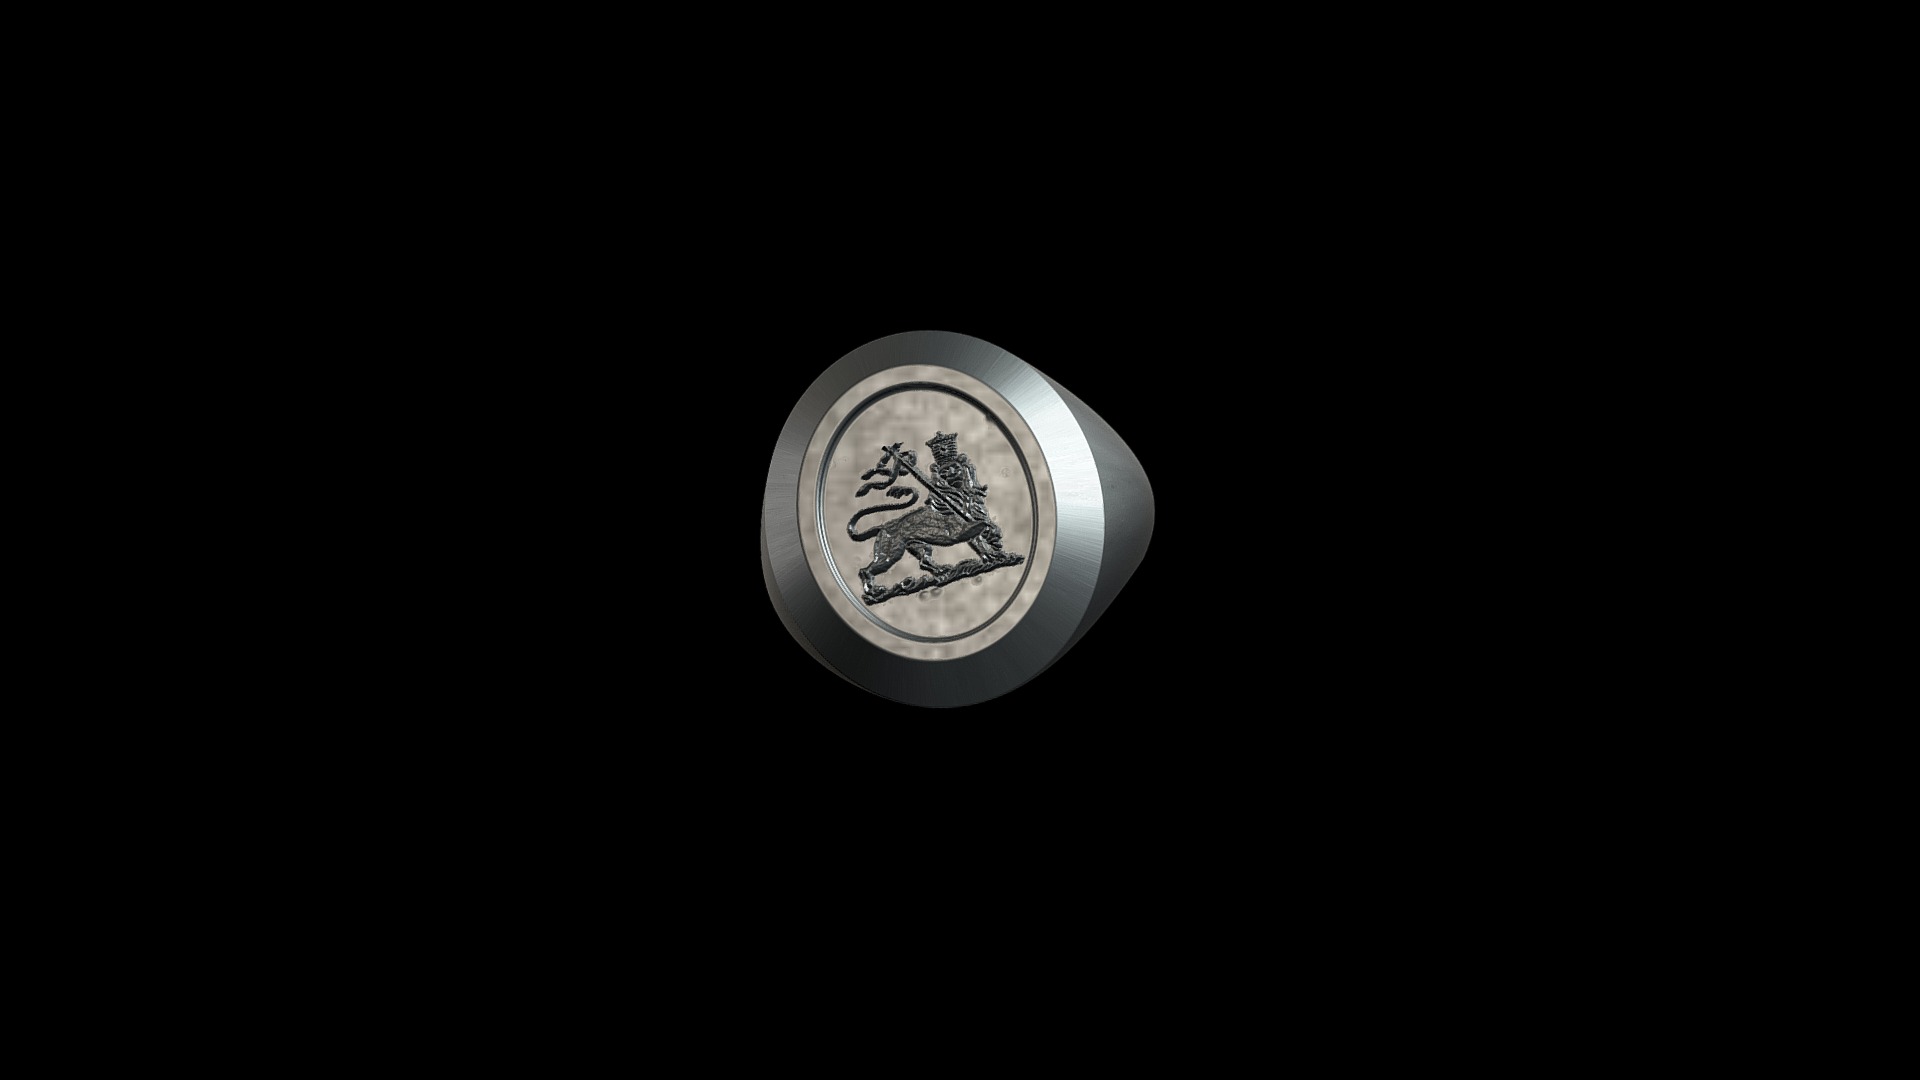 3D model Lion of Judah ring - This is a 3D model of the Lion of Judah ring. The 3D model is about a logo on a black background.